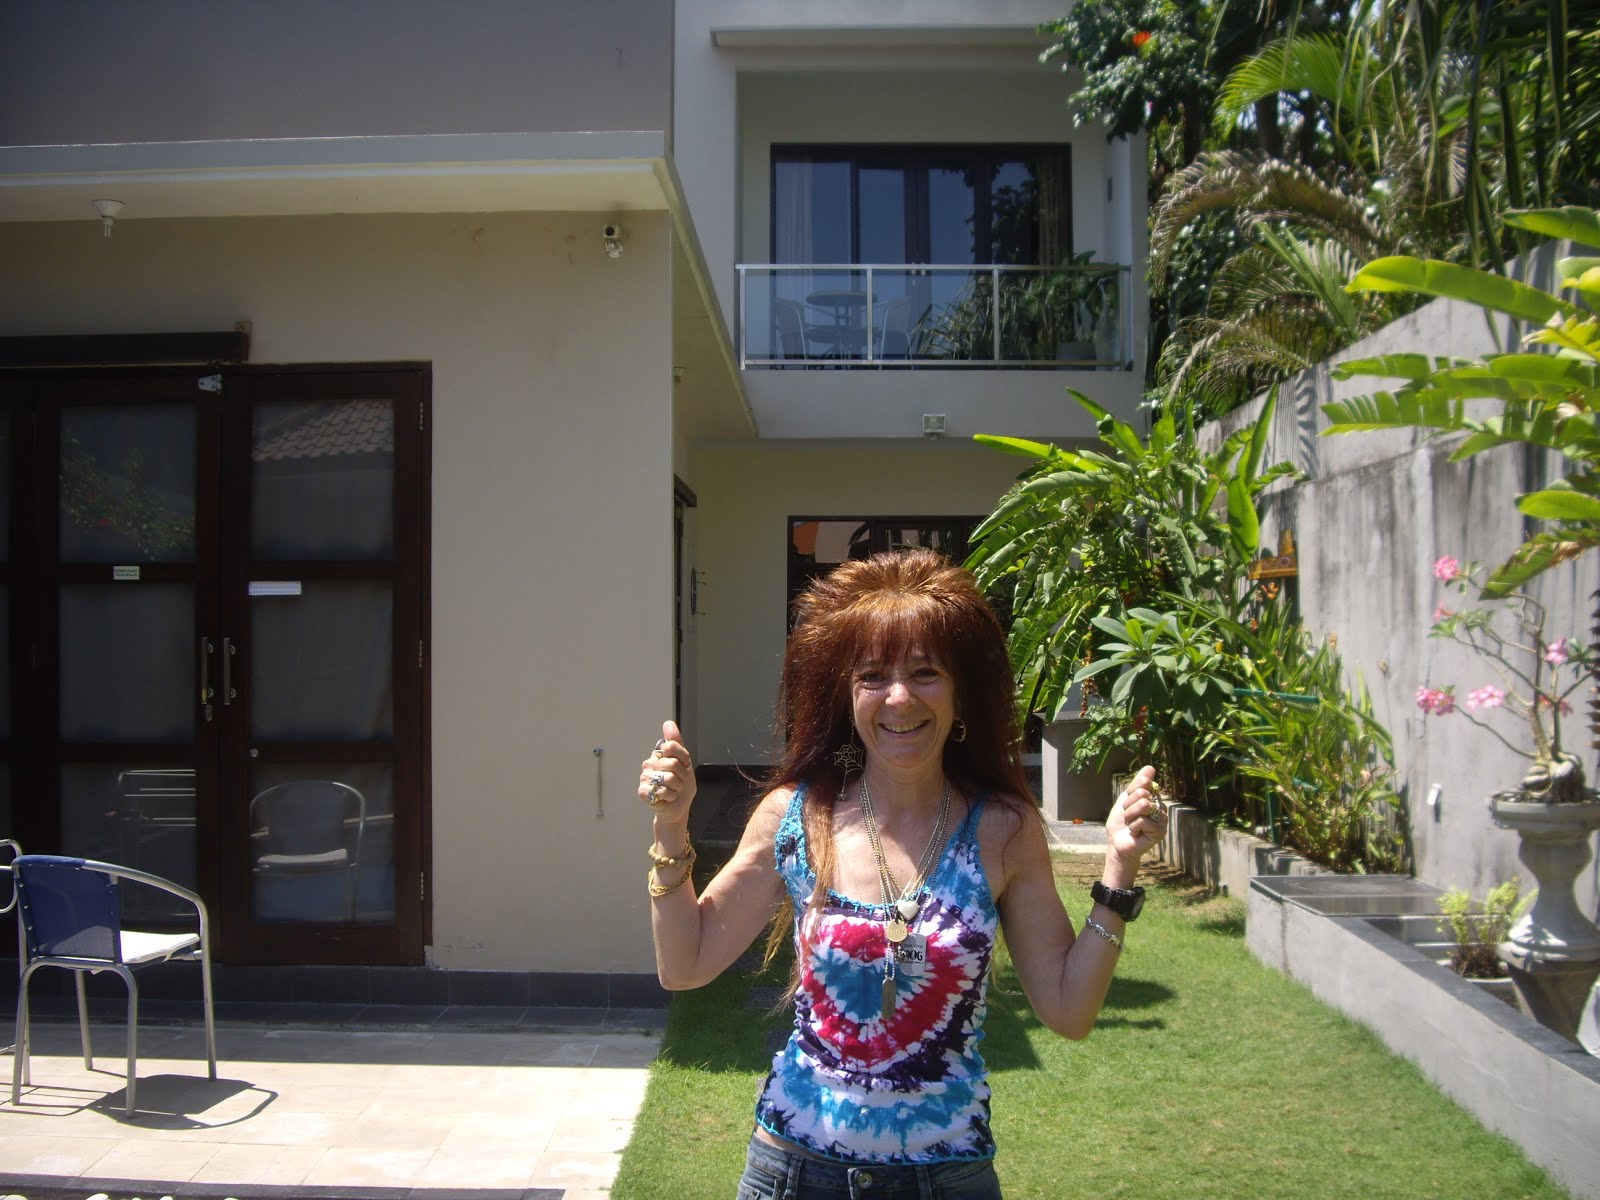 VILLA DE COOPS IN LEGIAN--AN EXCELLENT PLACE FOR UPSCALE ACCOMMODATION AND RELAXATION